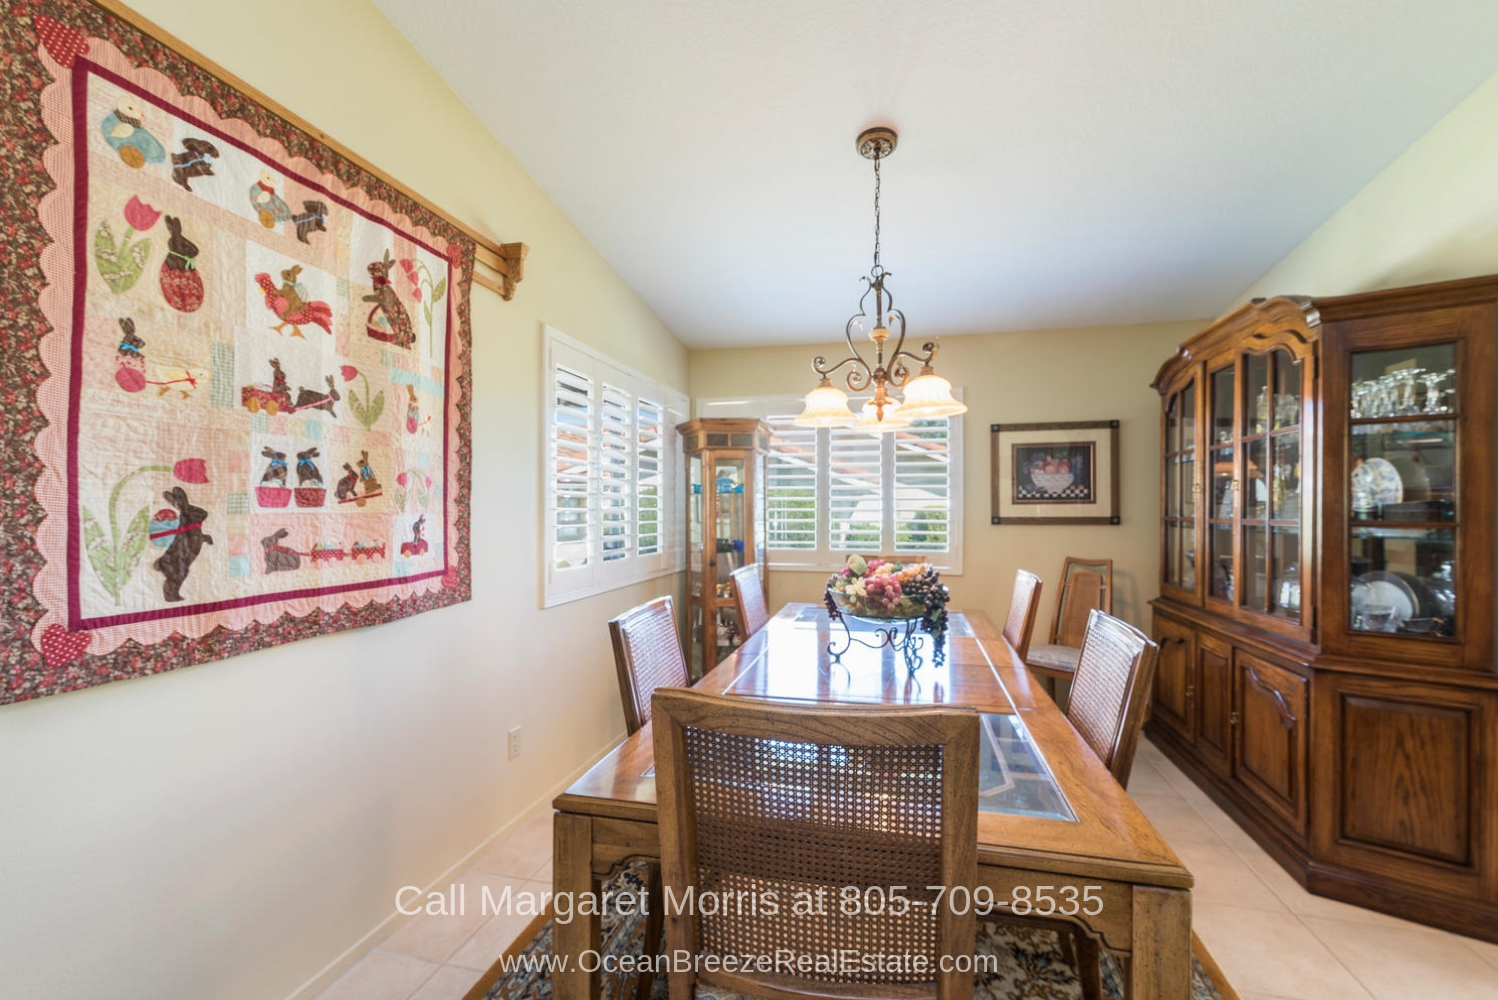 Golf Homes in Nipomo CA  - Entertainment is easy in the spacious formal dining room of this Blacklake golf home that can easily seat 12.